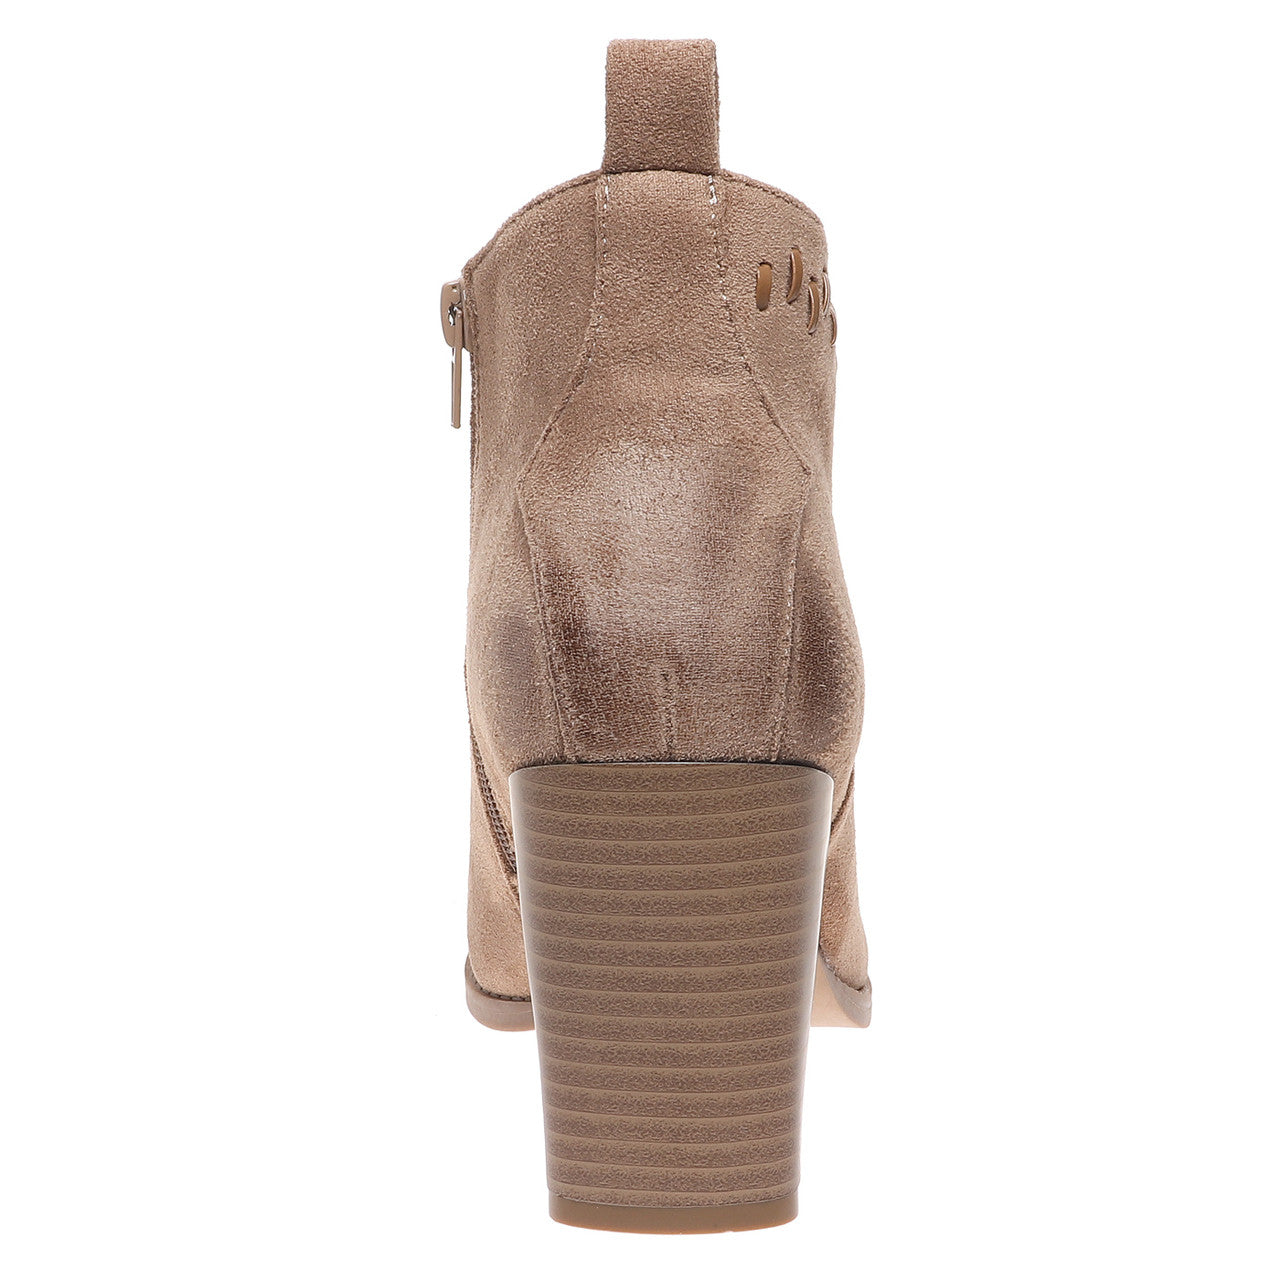 CAMMY-12 BOOT - TAUPE